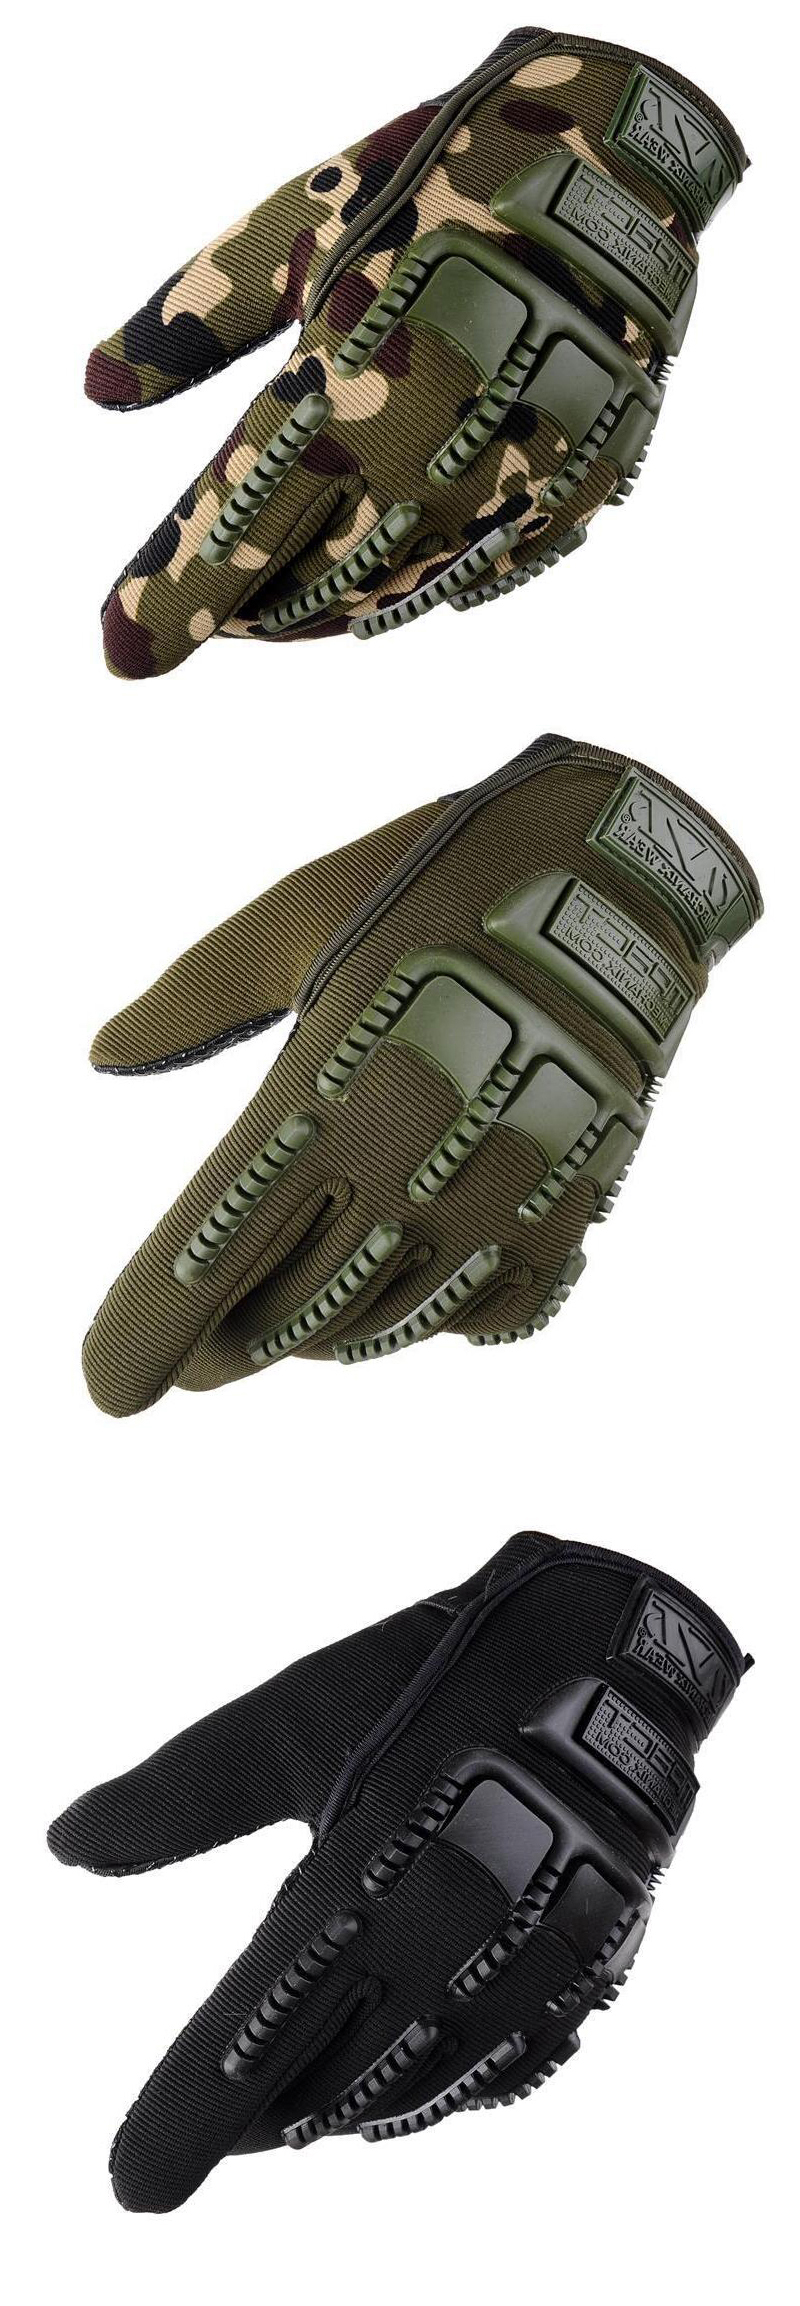 1Pair-FREE-SOLIDER-Tactical-Glove-Riding-Gloves-Full-Finger-Slip-Resistant-Gloves-For-Cycling-Campin-1442703-2